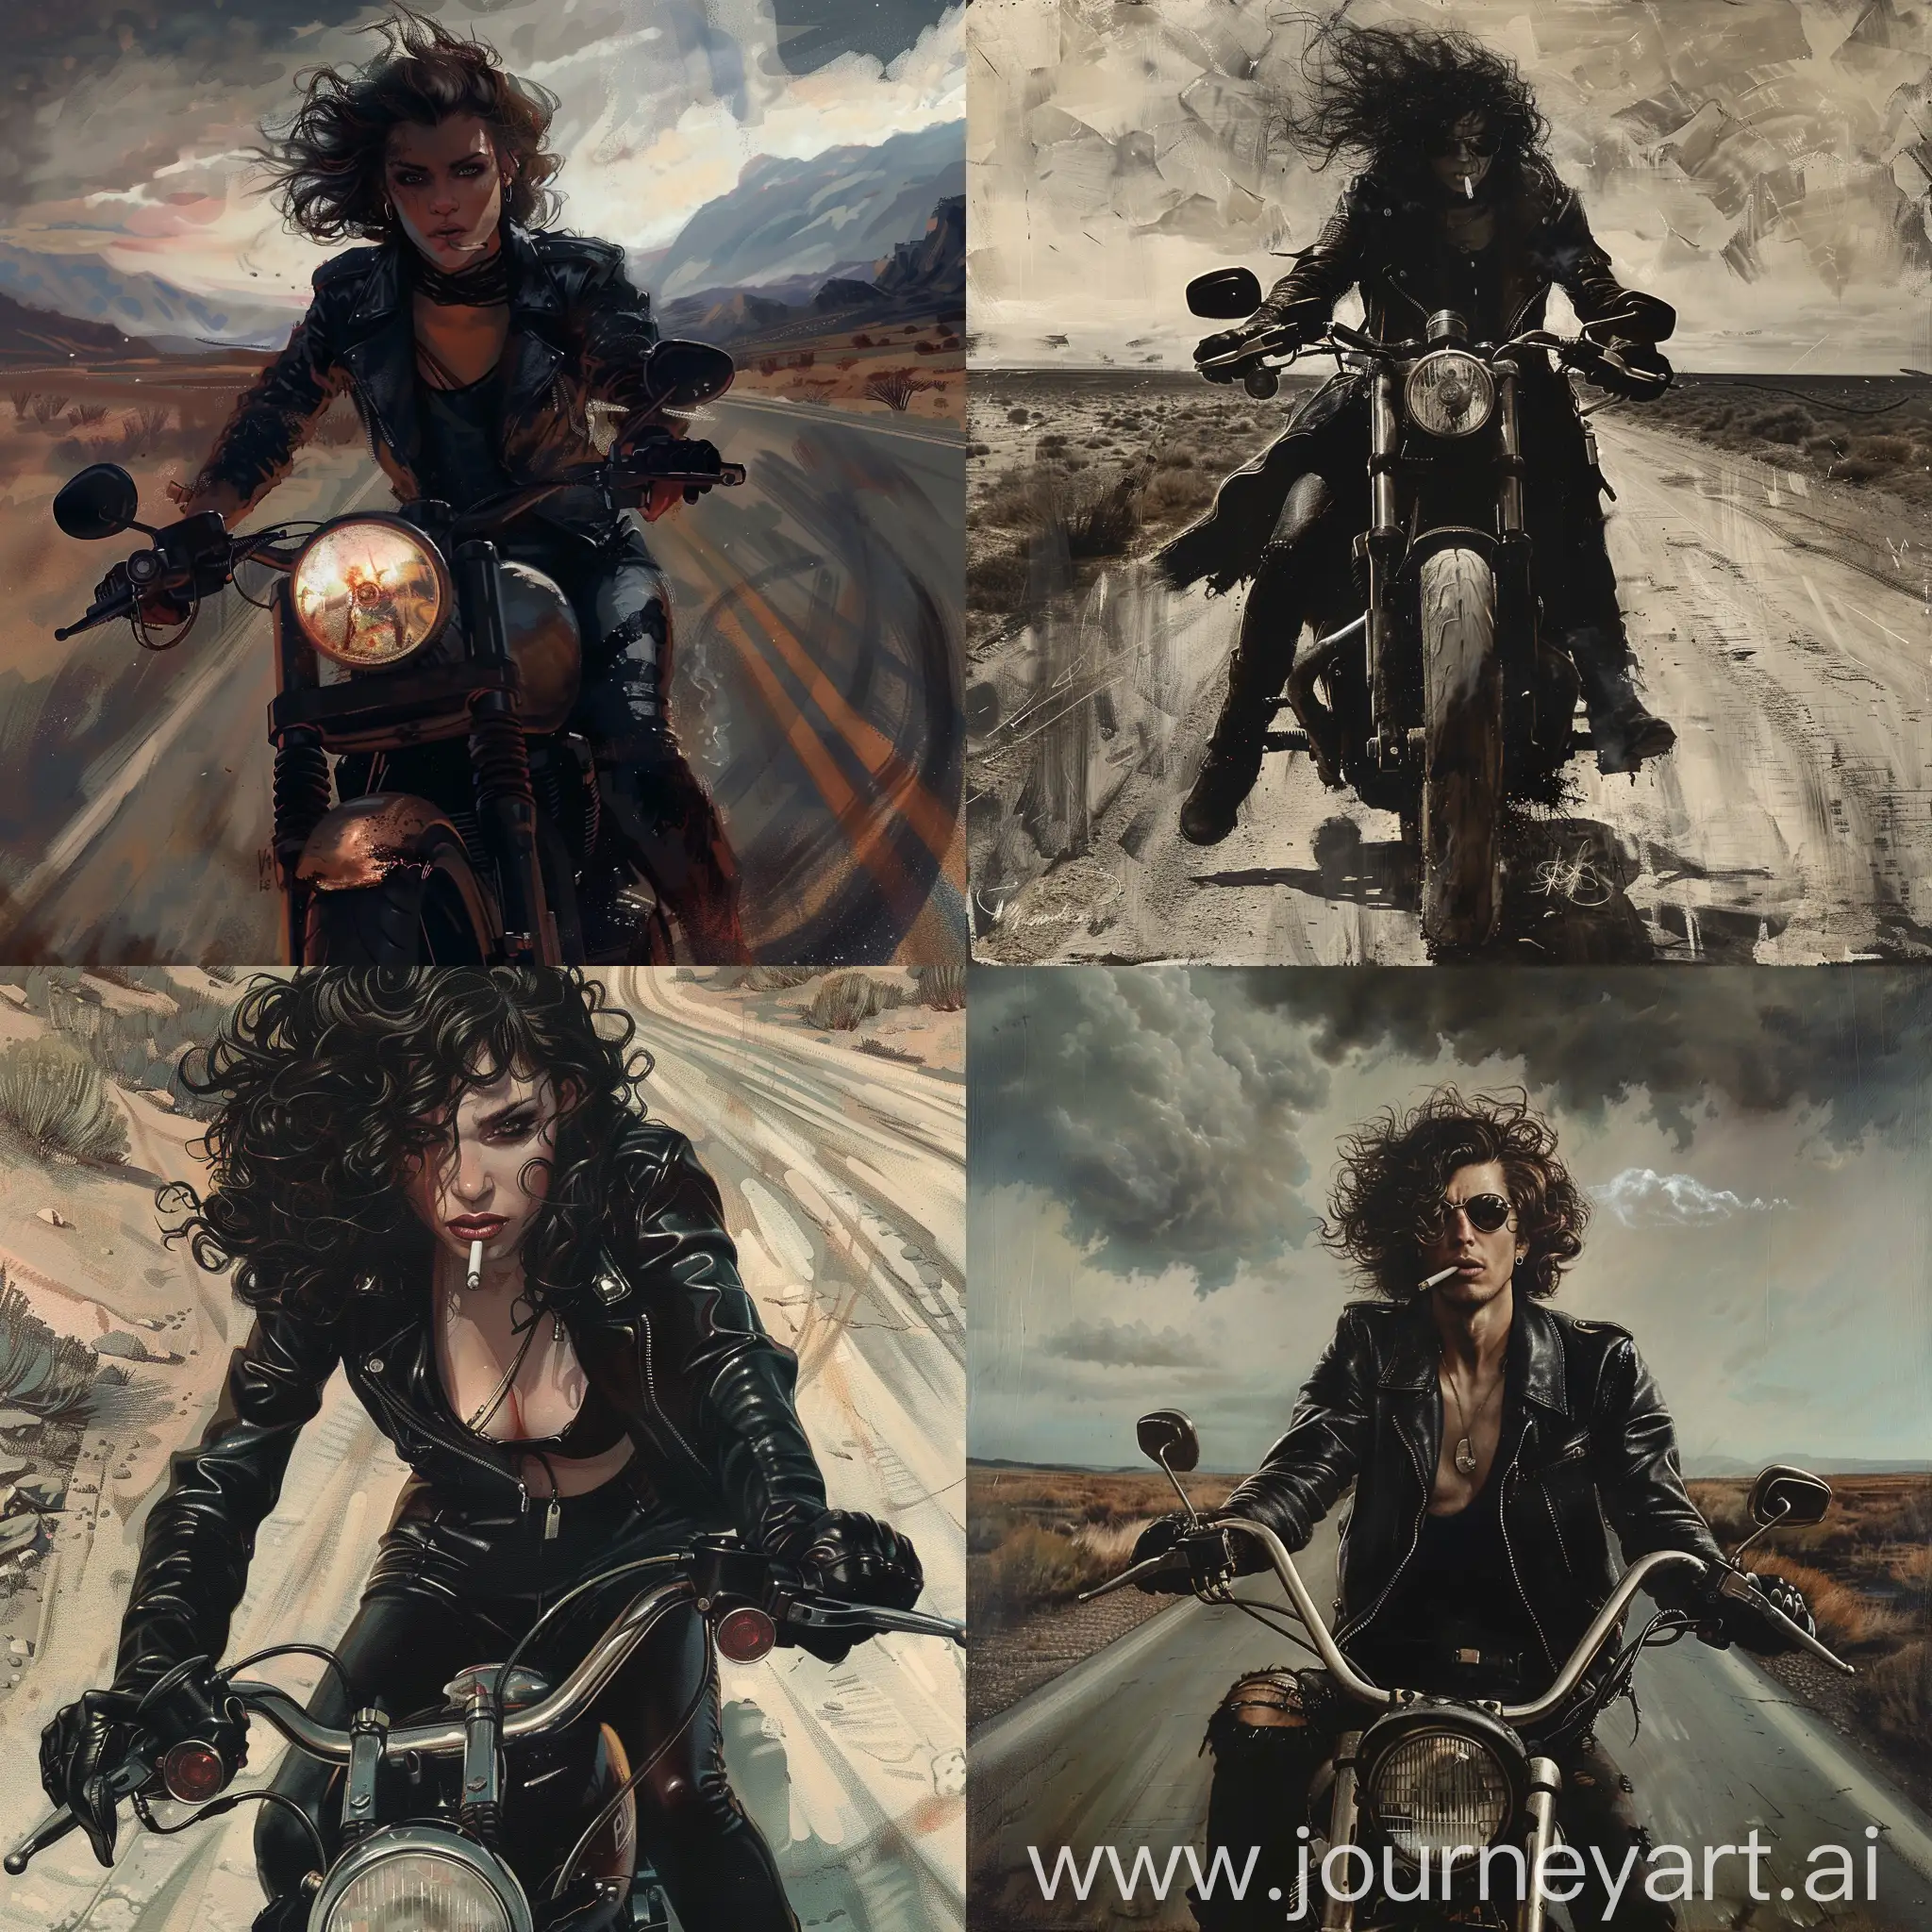 A motorcyclist comes down the deserted road of Darah Barun
Bony and angular face, curly hair, wearing a black dress, a leather jacket with a collar, black slash pants, and long black boots.
Riding a heavy motorcycle
And a cigarette in the corner of his mouth
